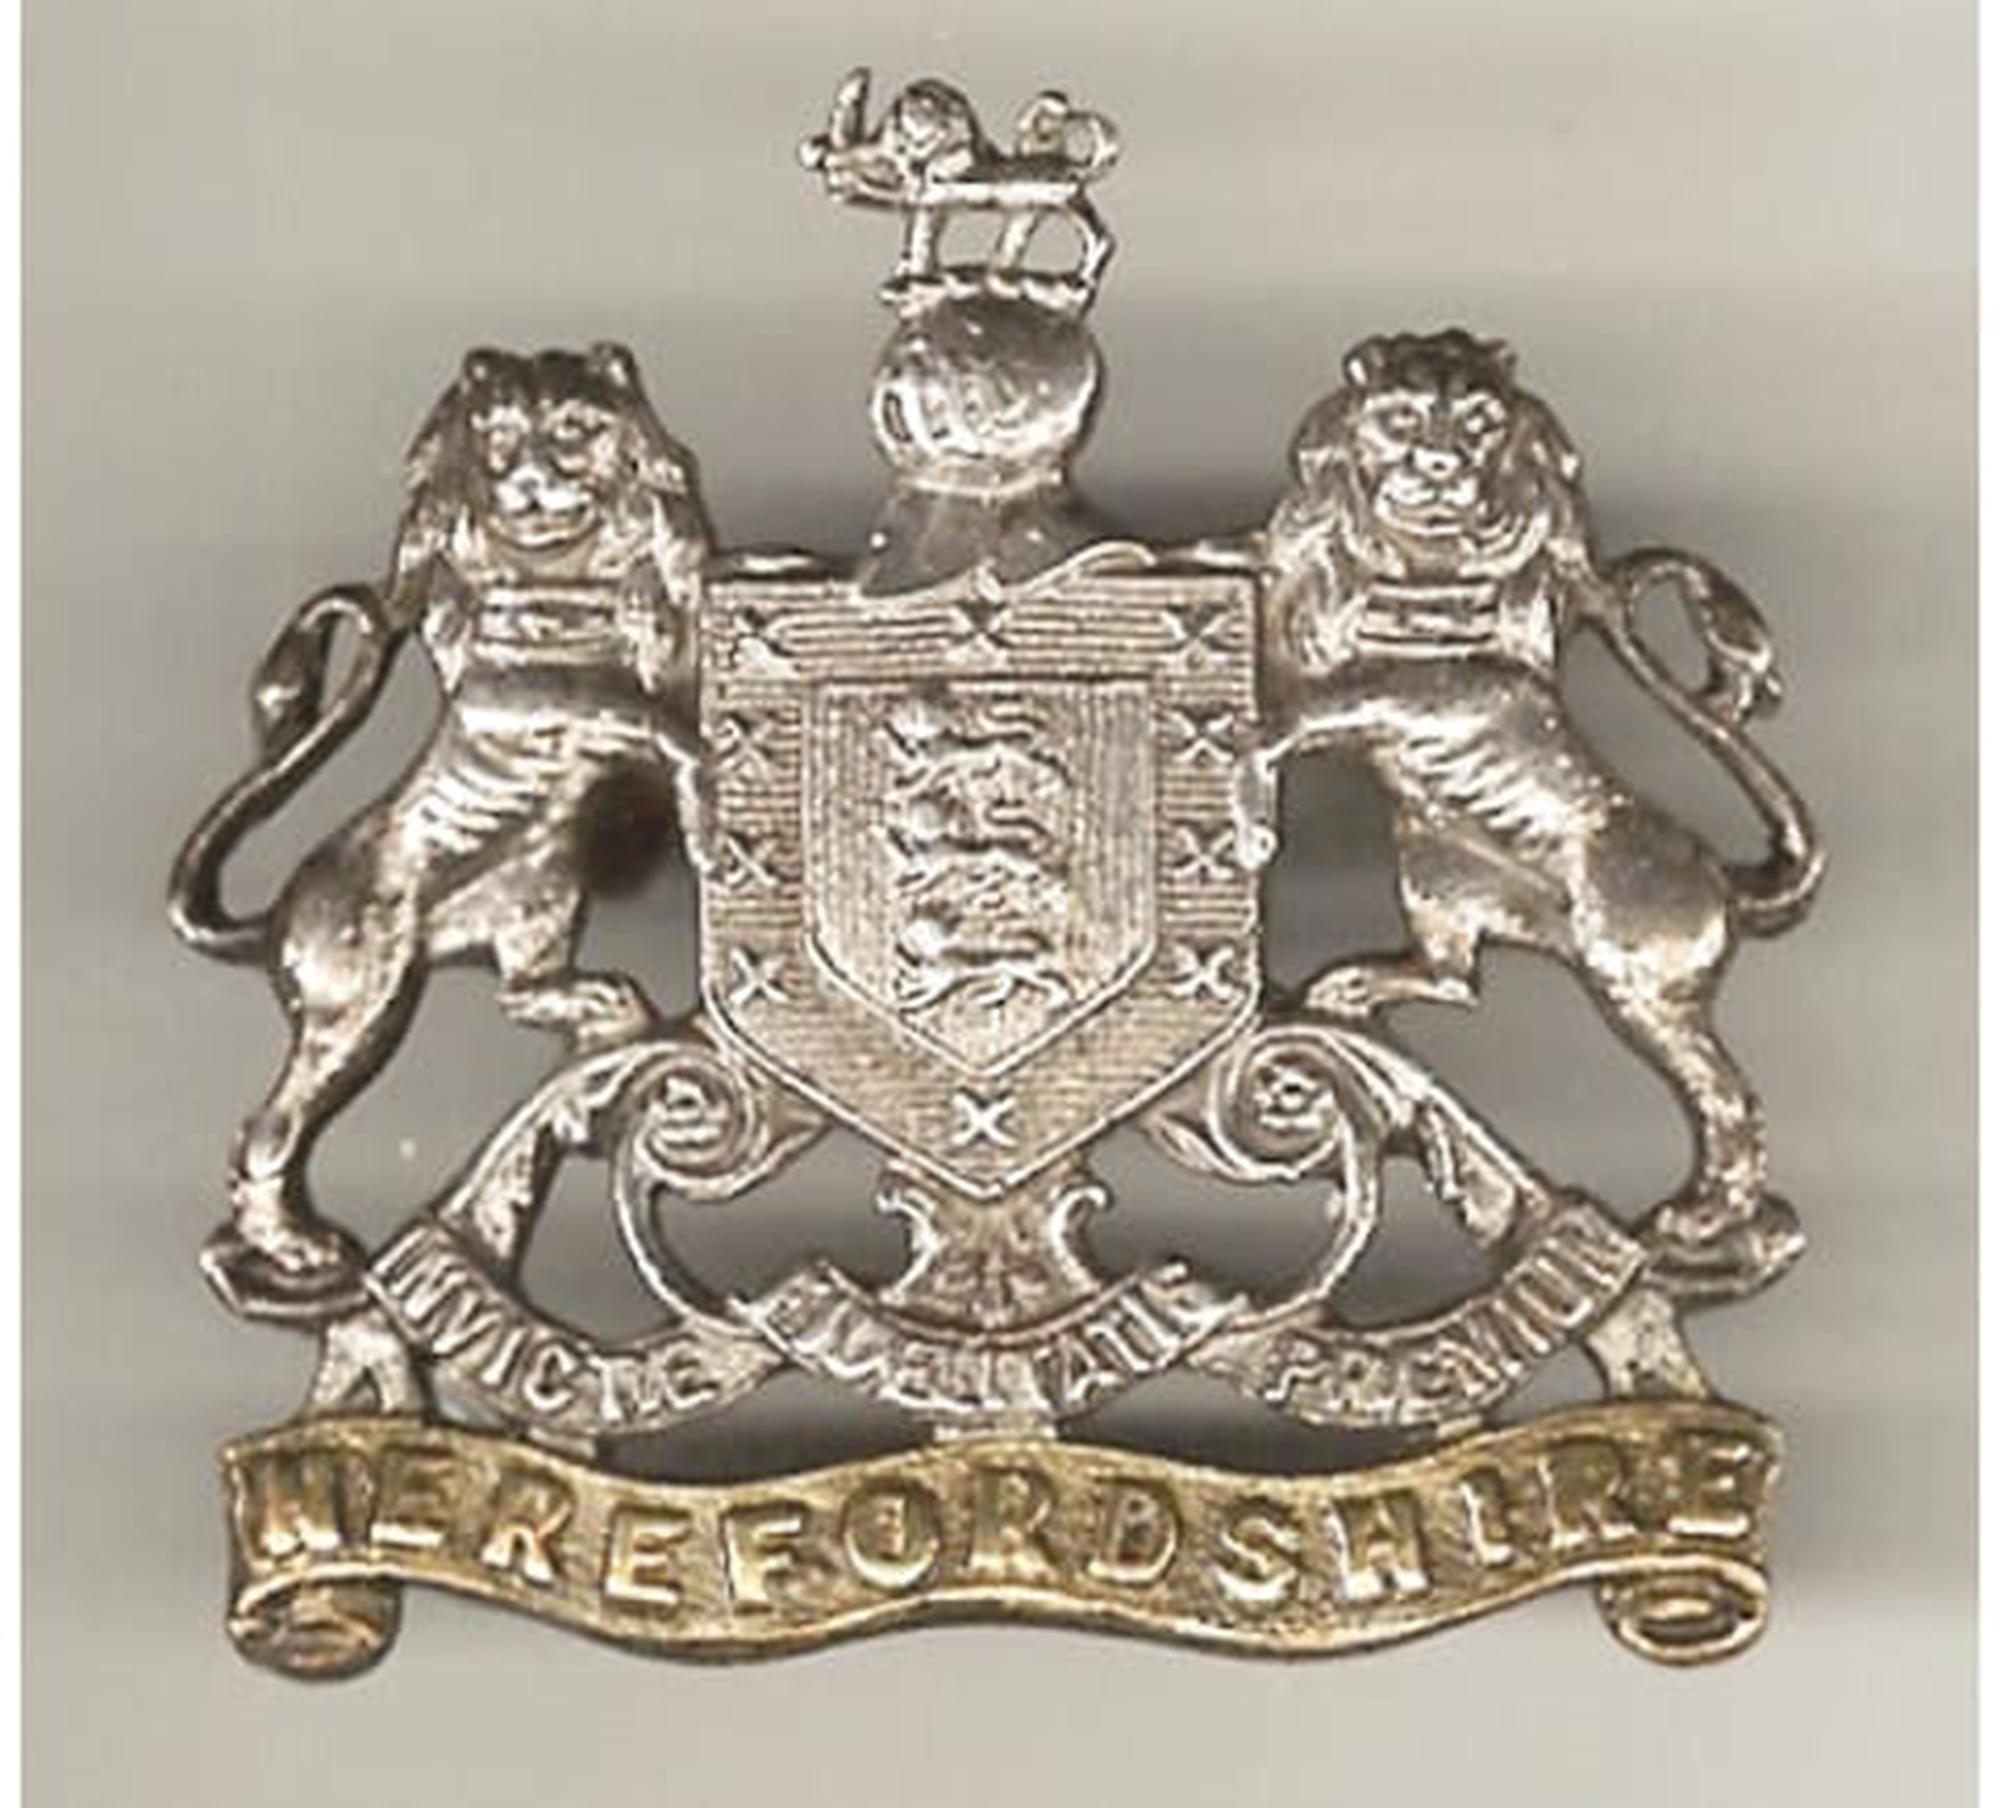 The Herefordshire Regiment (TF)